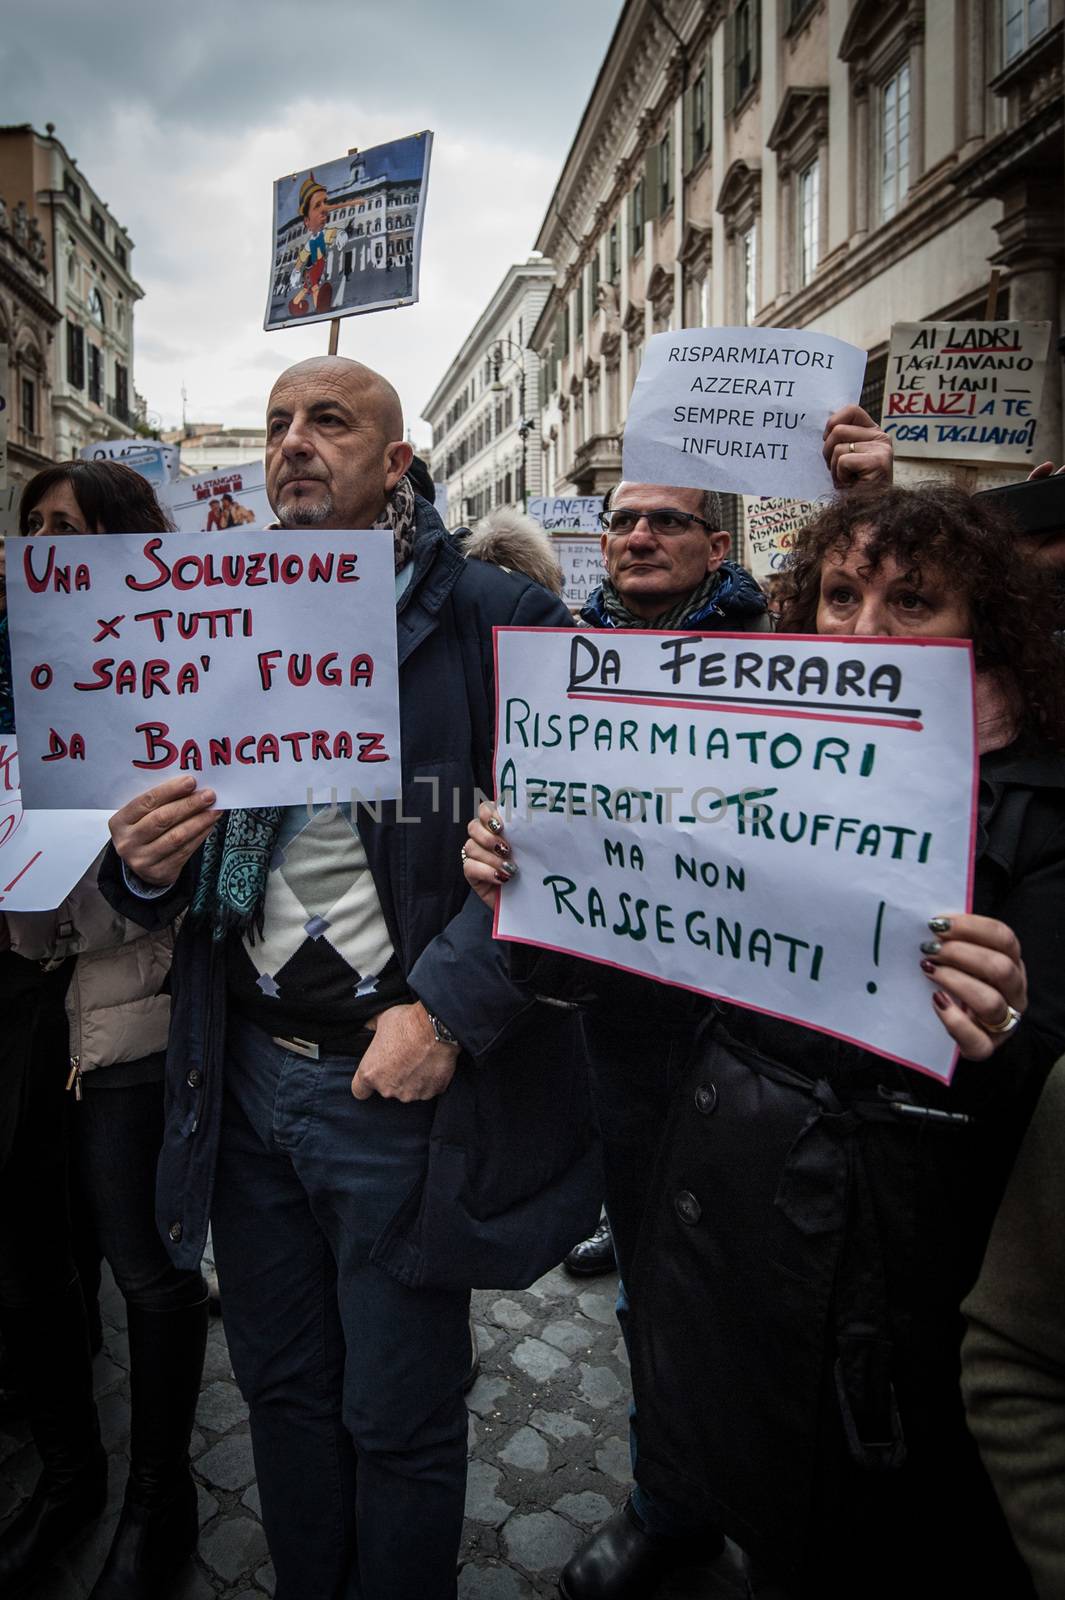 ITALY, Rome: As Italy's economy struggles in the face of a banking crisis, protesters fill the Piazza Santi Apostoli in Rome on January 31, 2016. They voice their fears about the state of their savings.Woman's sign at right rights: Investors zeroed - cheated but not resigned.